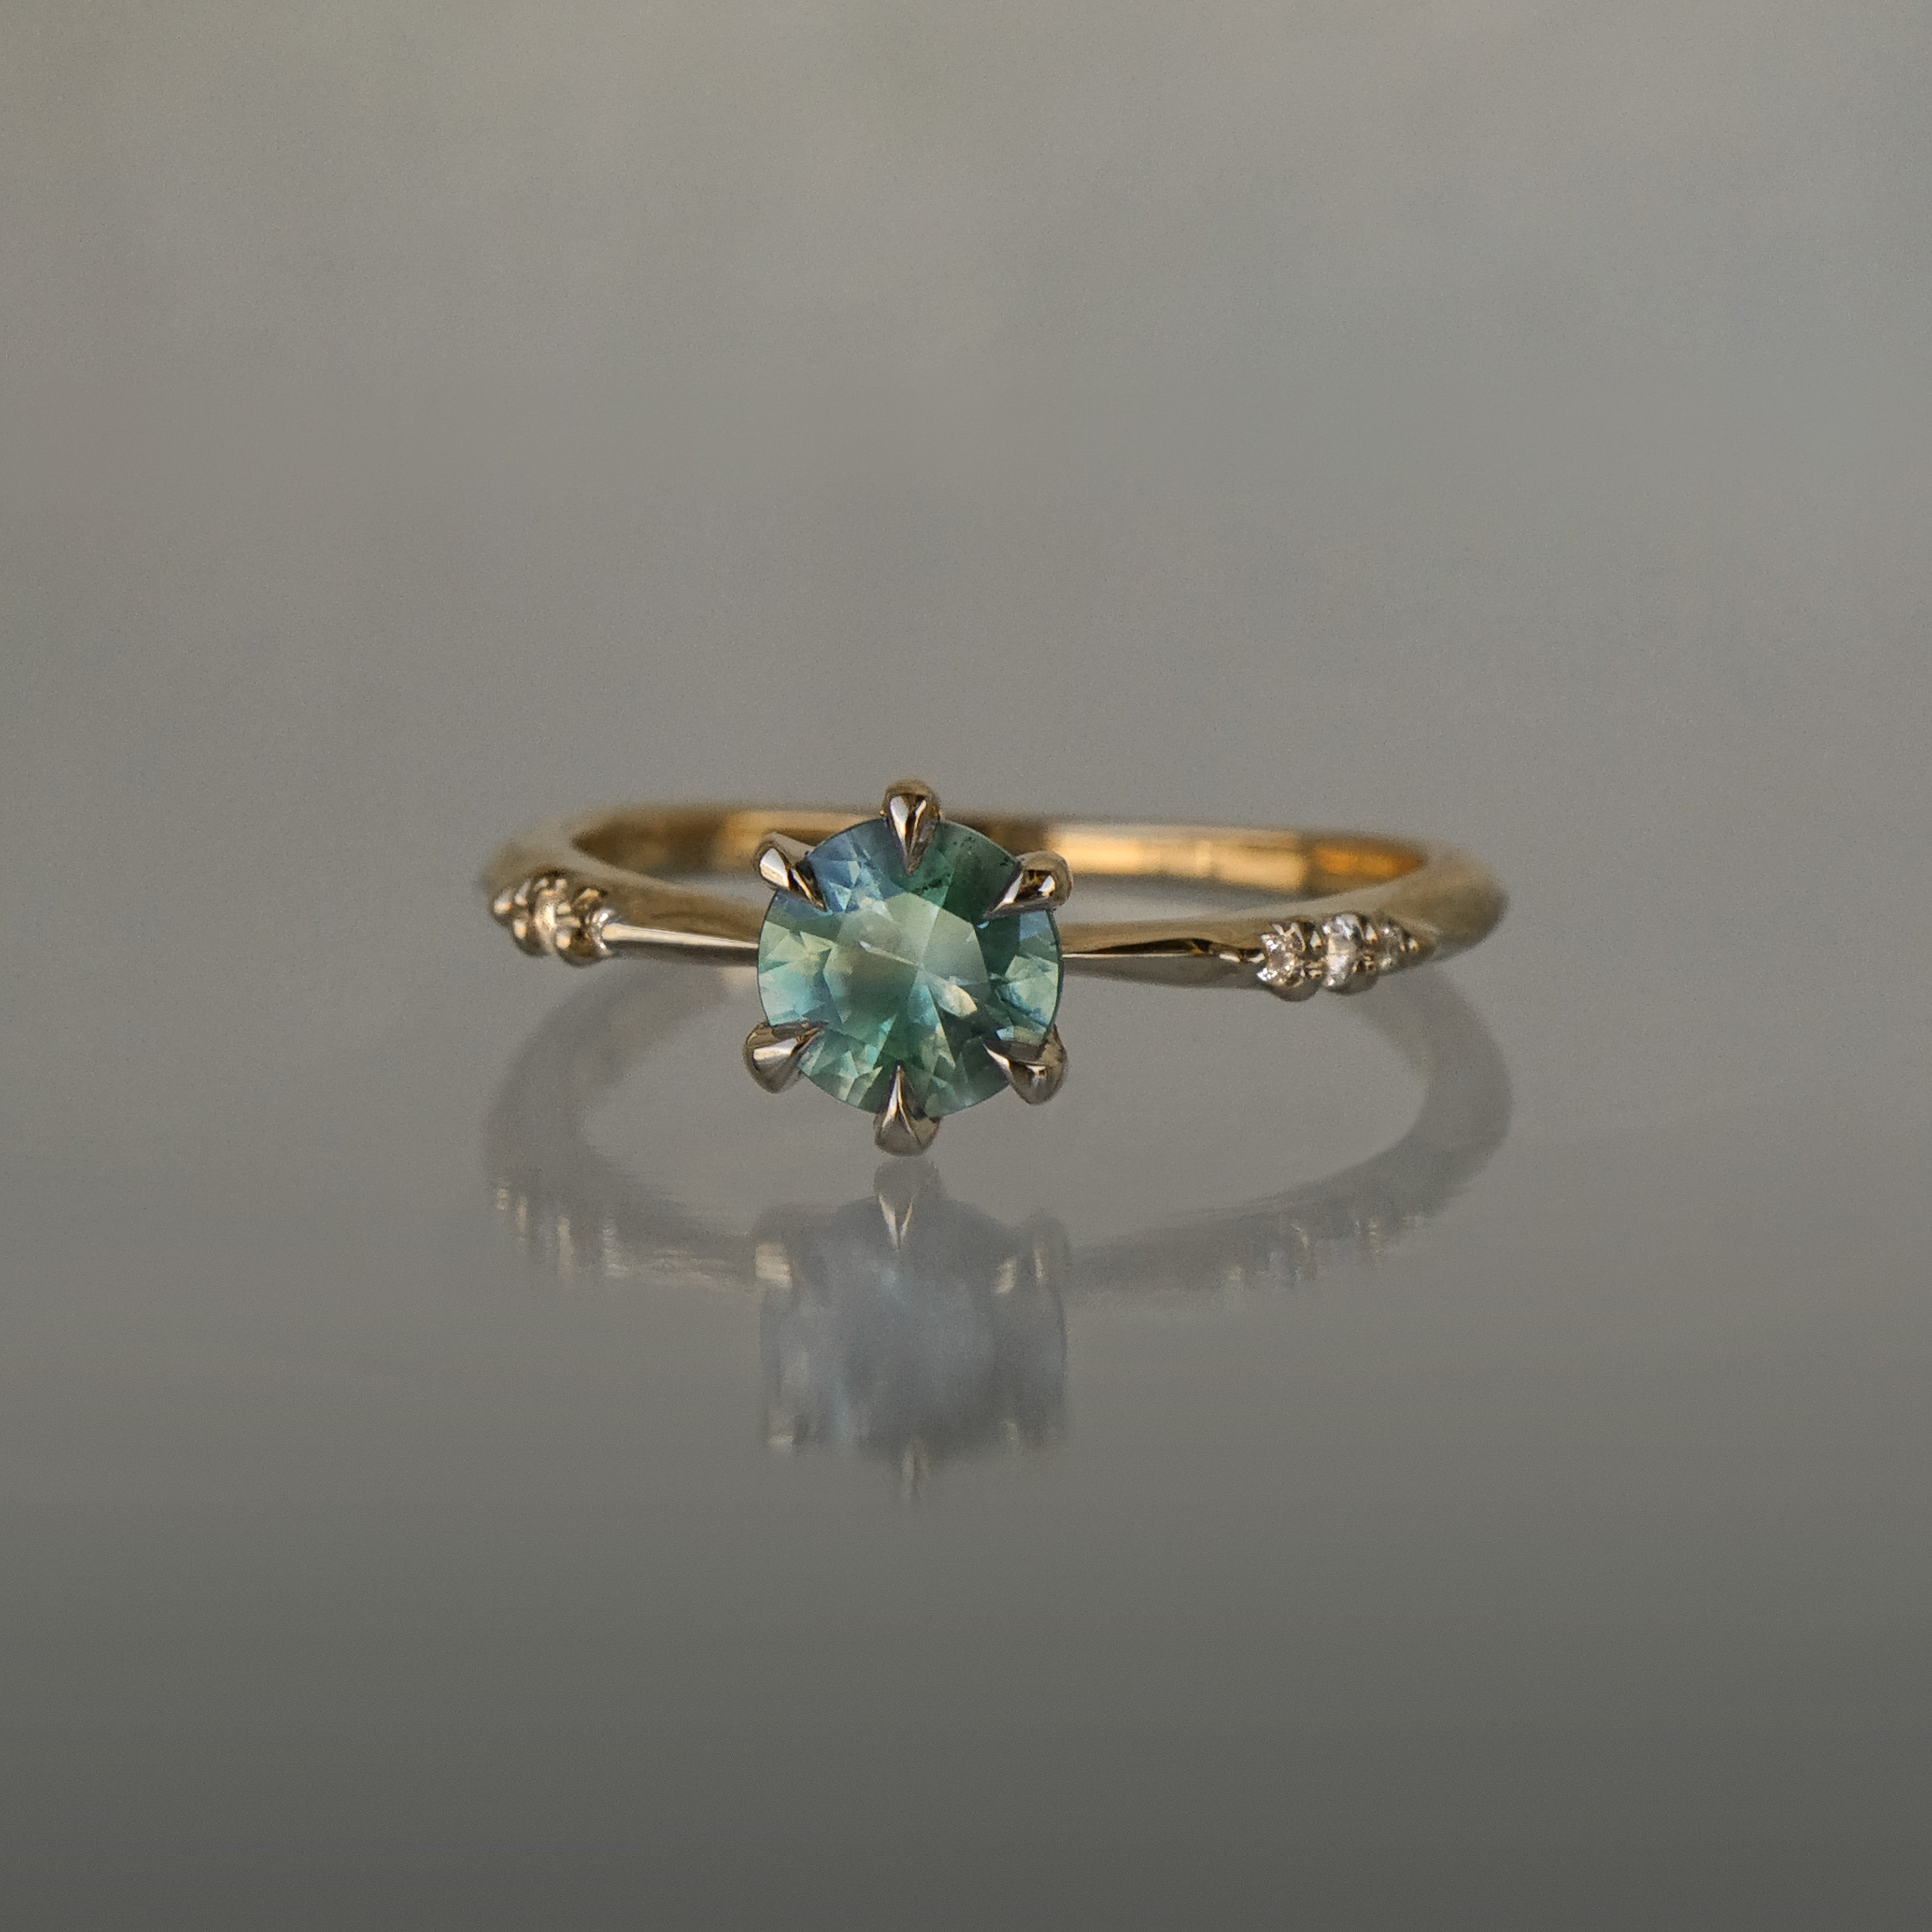 Dainty yellow gold Ilona style one of a kind engagement ring by Laurie Fleming Jewellery on a grey background, with a silky seafoam turquoise green sapphire and delicate twinkling diamonds on the band.